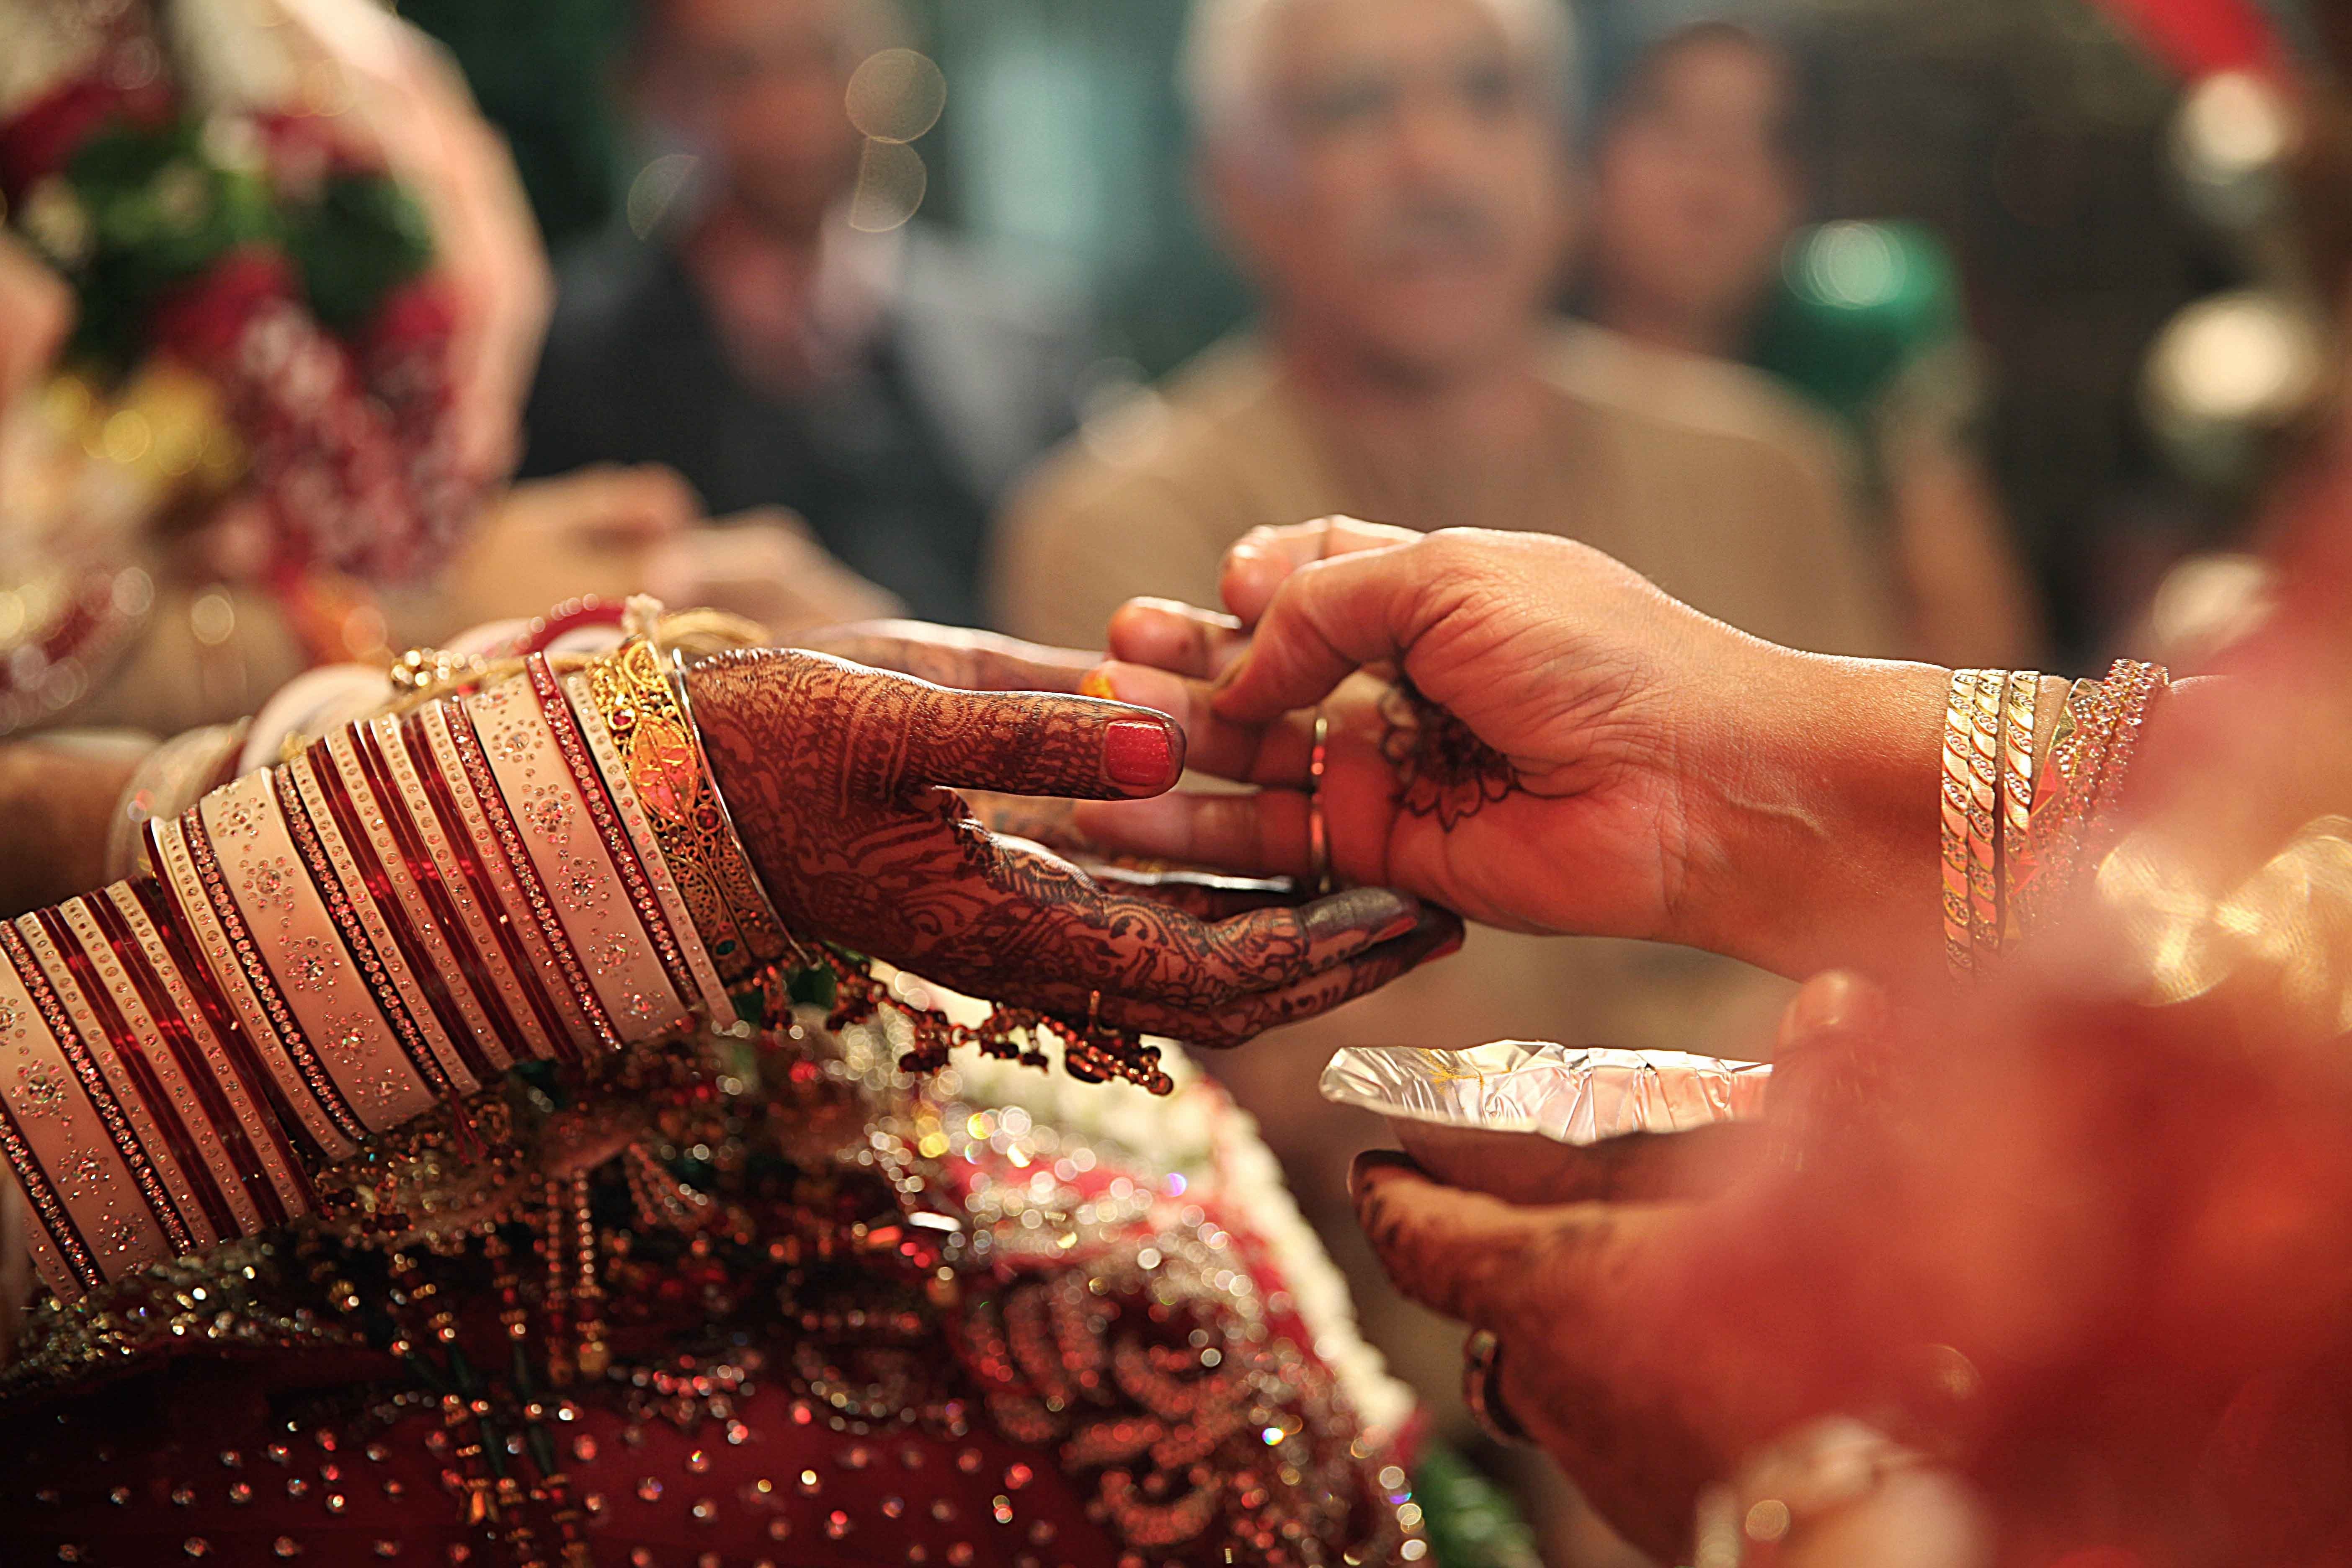 People Share Their Experience Of Being In An Arranged Marriage HuffPost UK Life